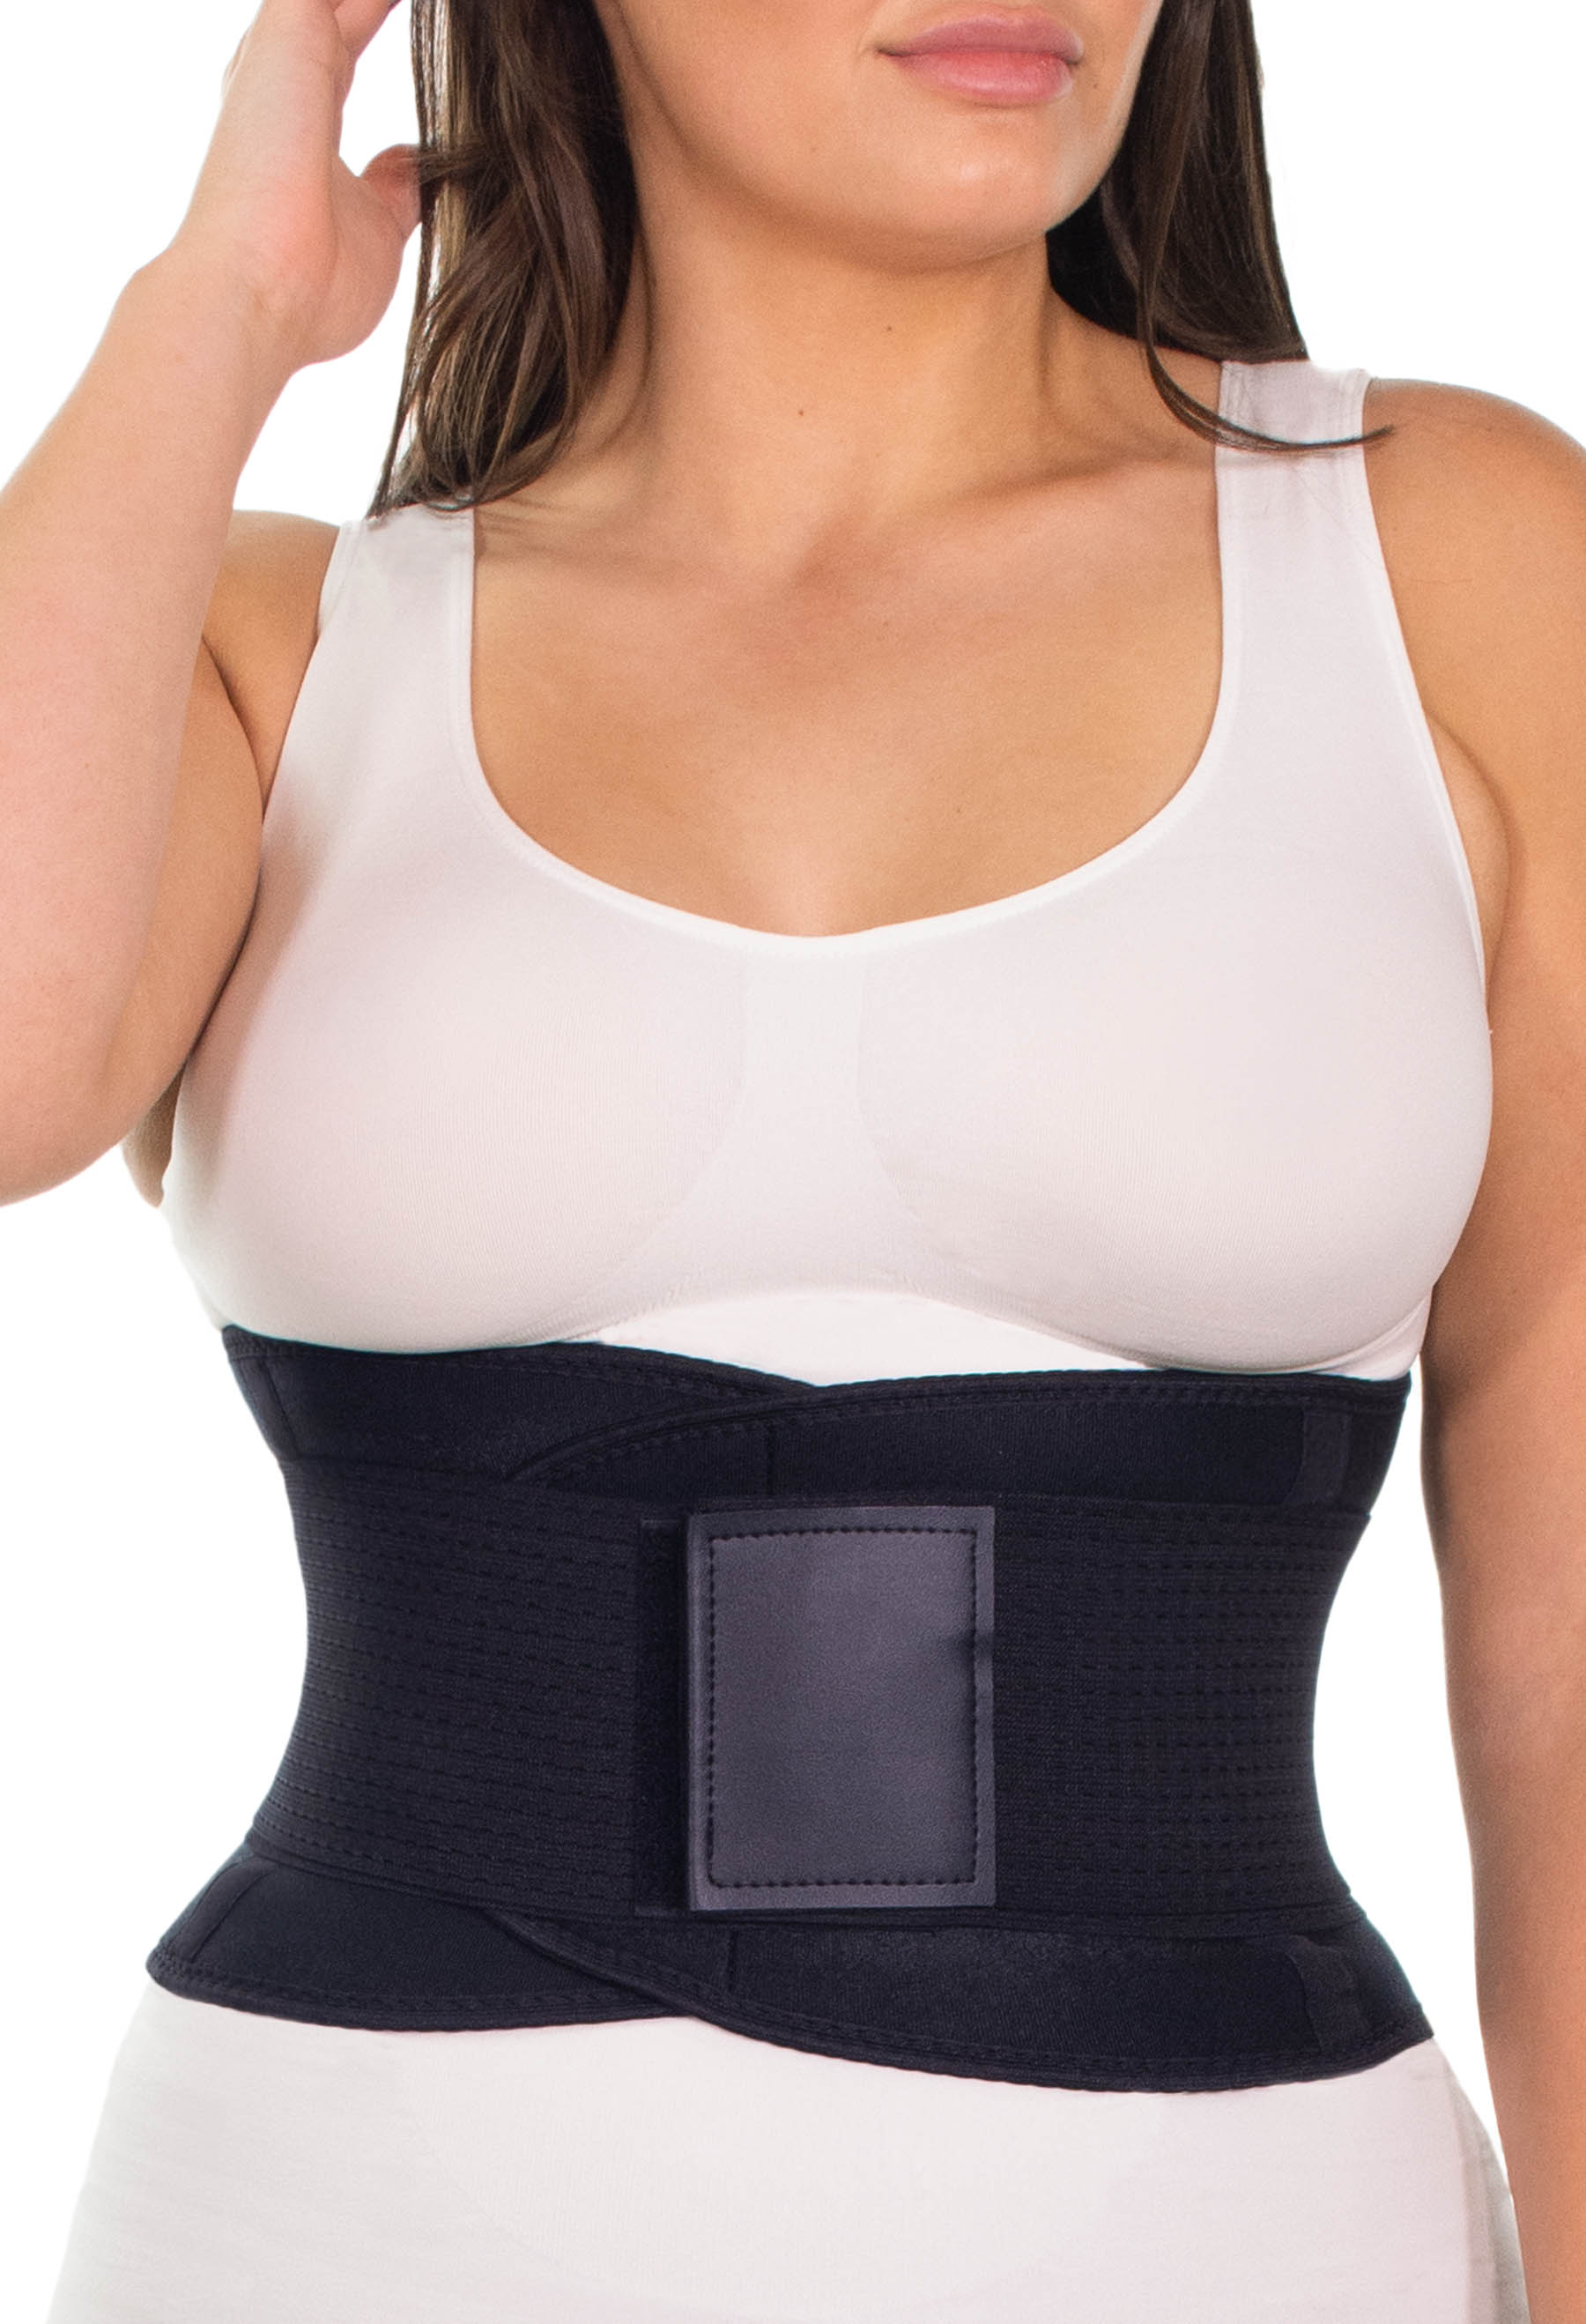 Enhance Your Workout With Wholesale Waist Thigh Trimmer